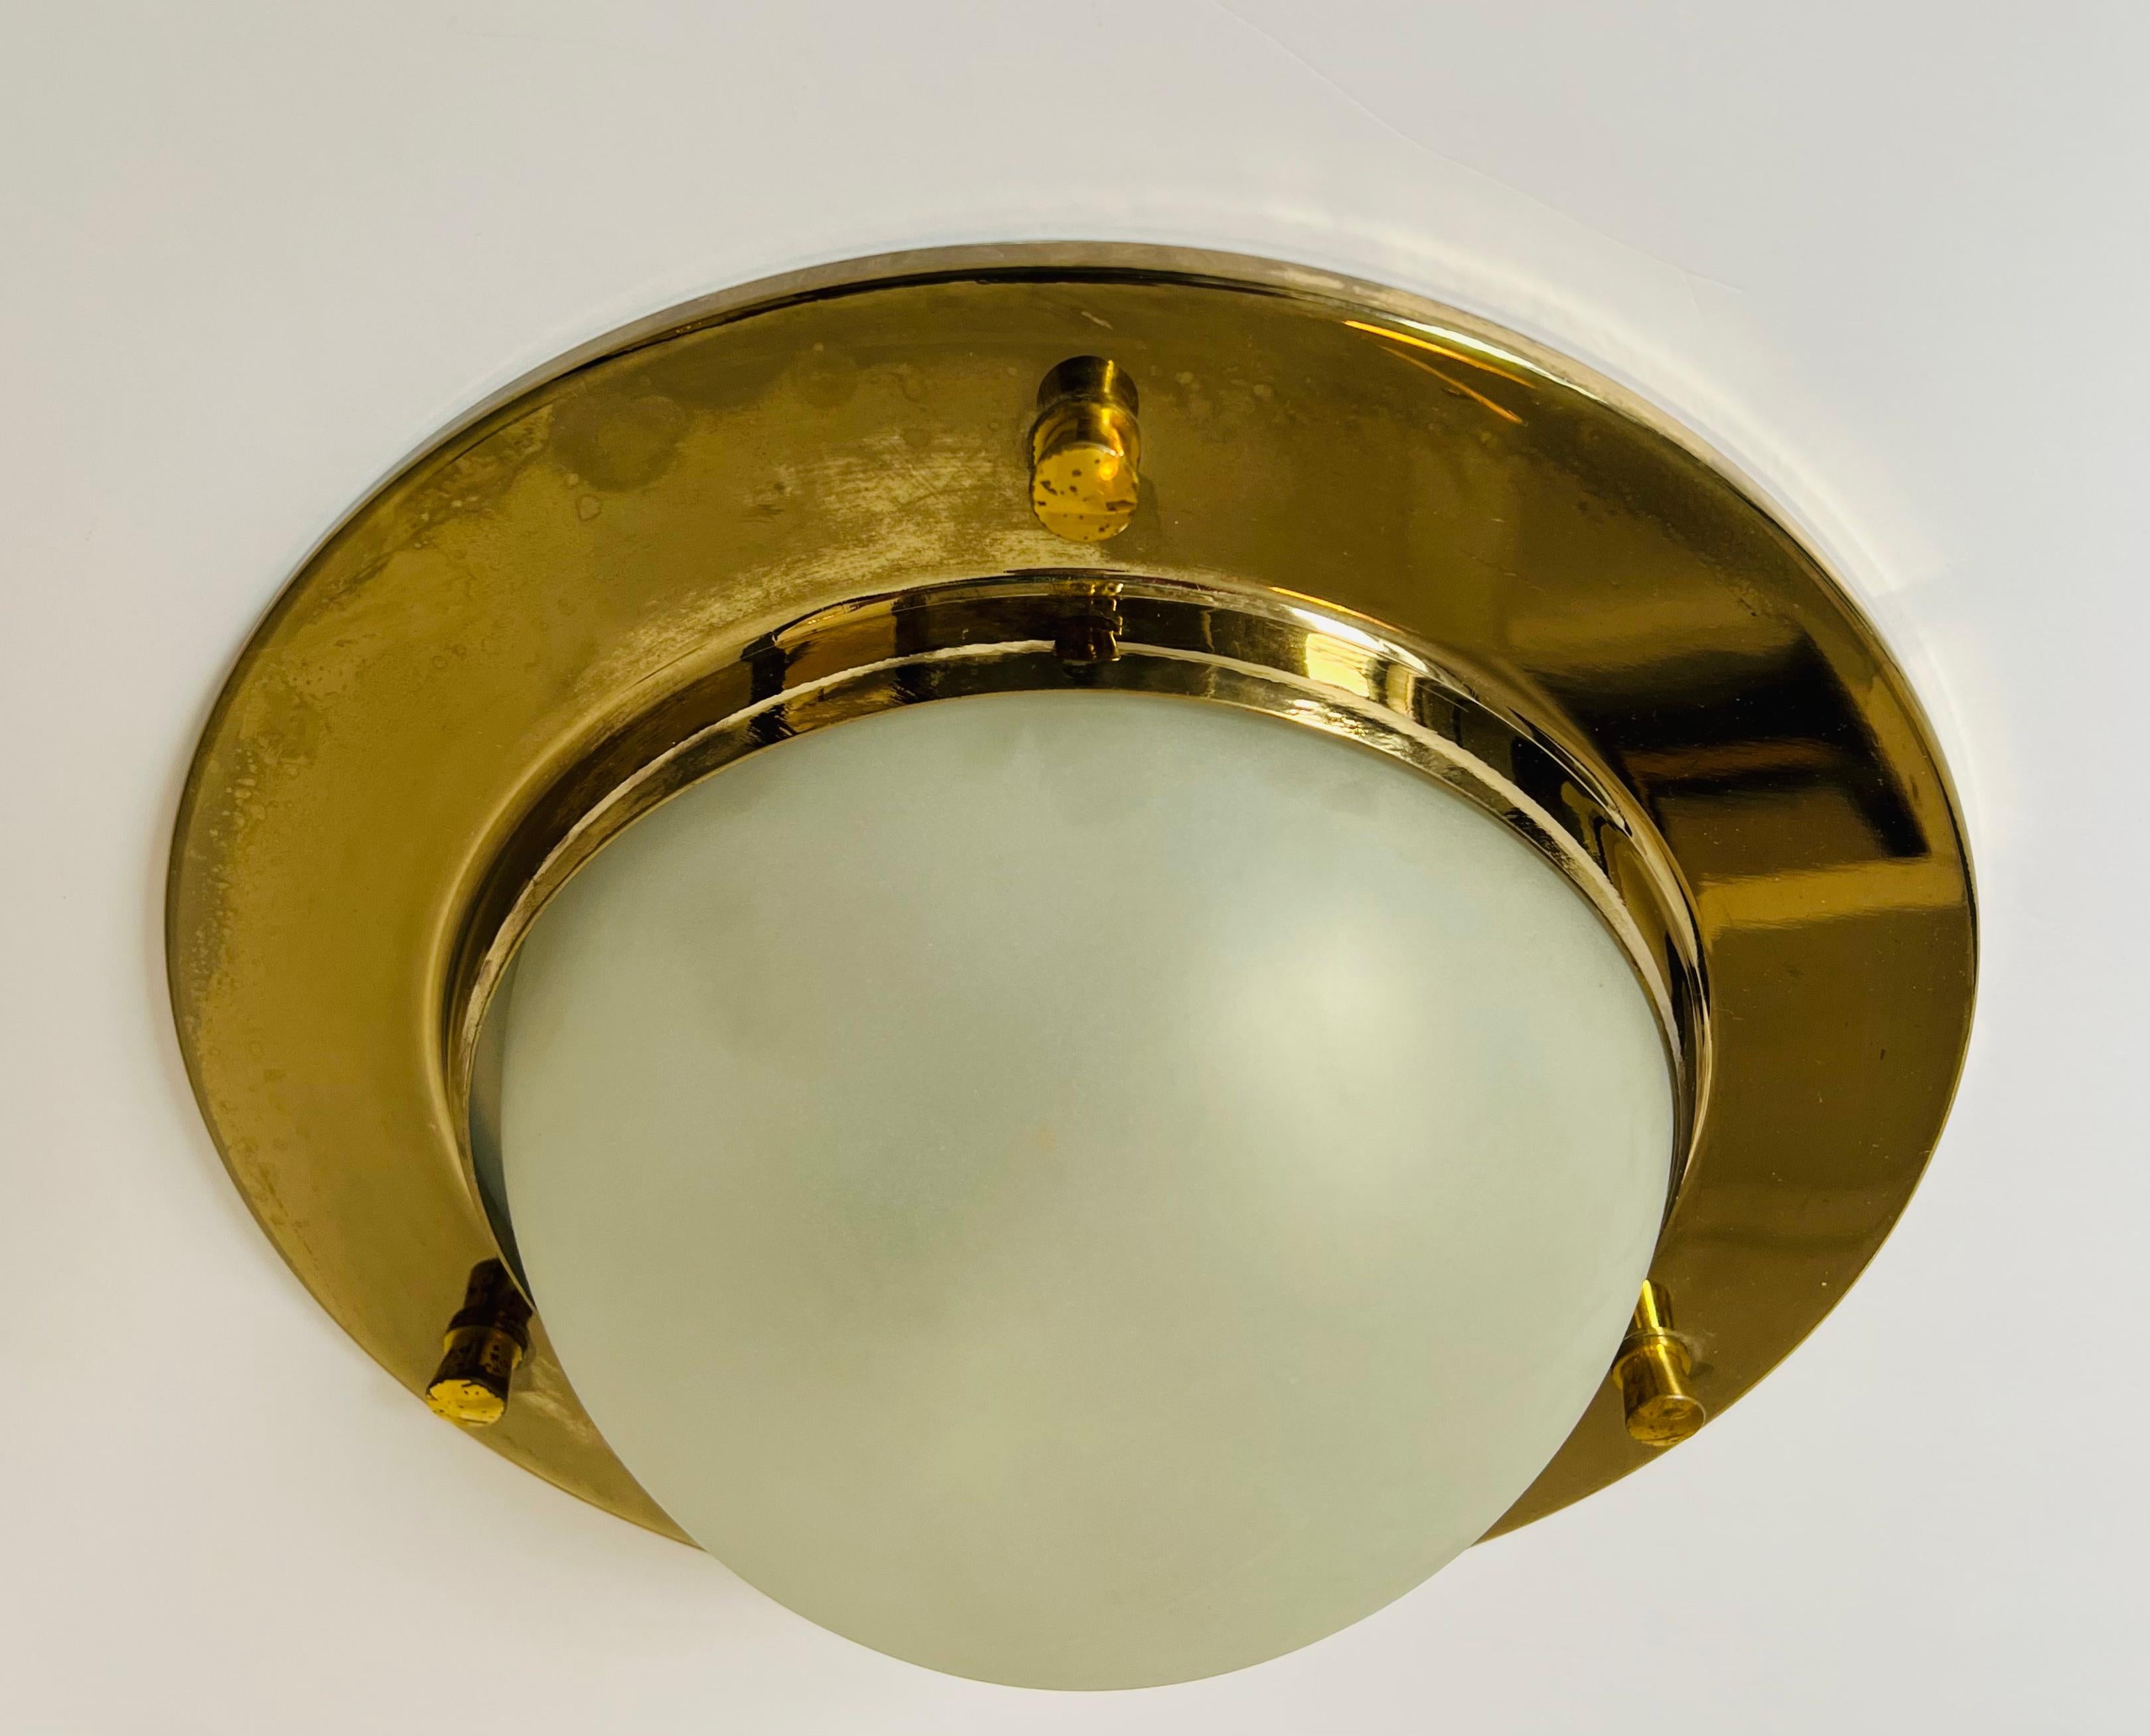 A wonderful Nautical style aged polished brass flush light with a frosted glass dome shade by Italian maker, Azucena. Rewired.